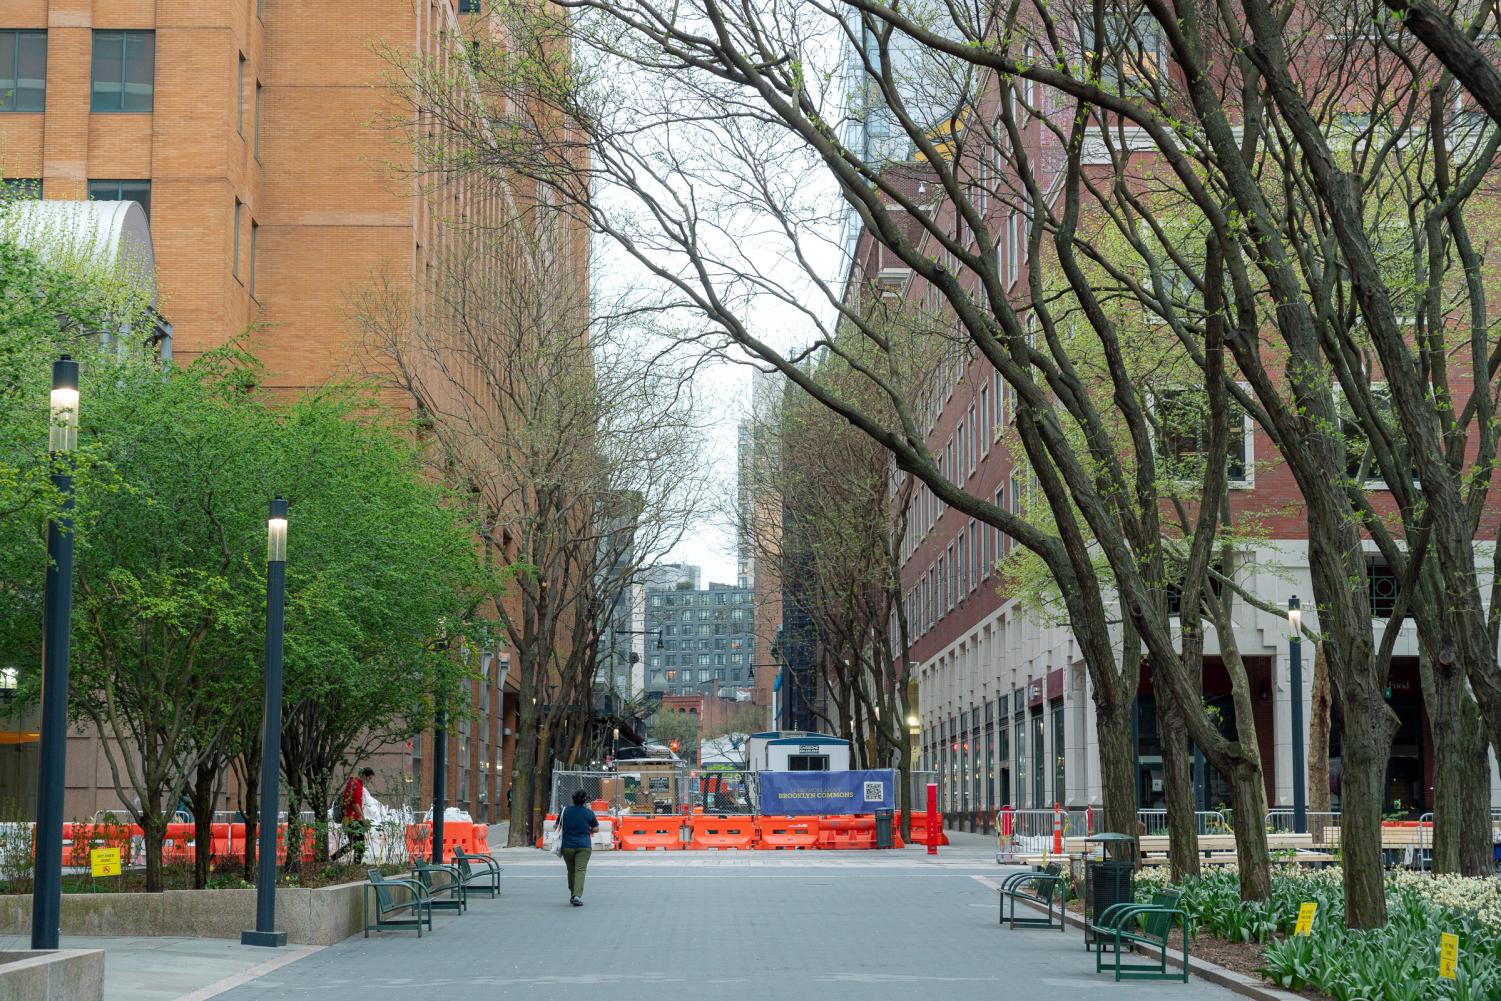 A small park appears nestled between various MetroTech buildings. The buildings share similar architectural styles of warm-toned facades and a surplus of small windows. The photo is taken as one walks along the path of the park between the buildings.